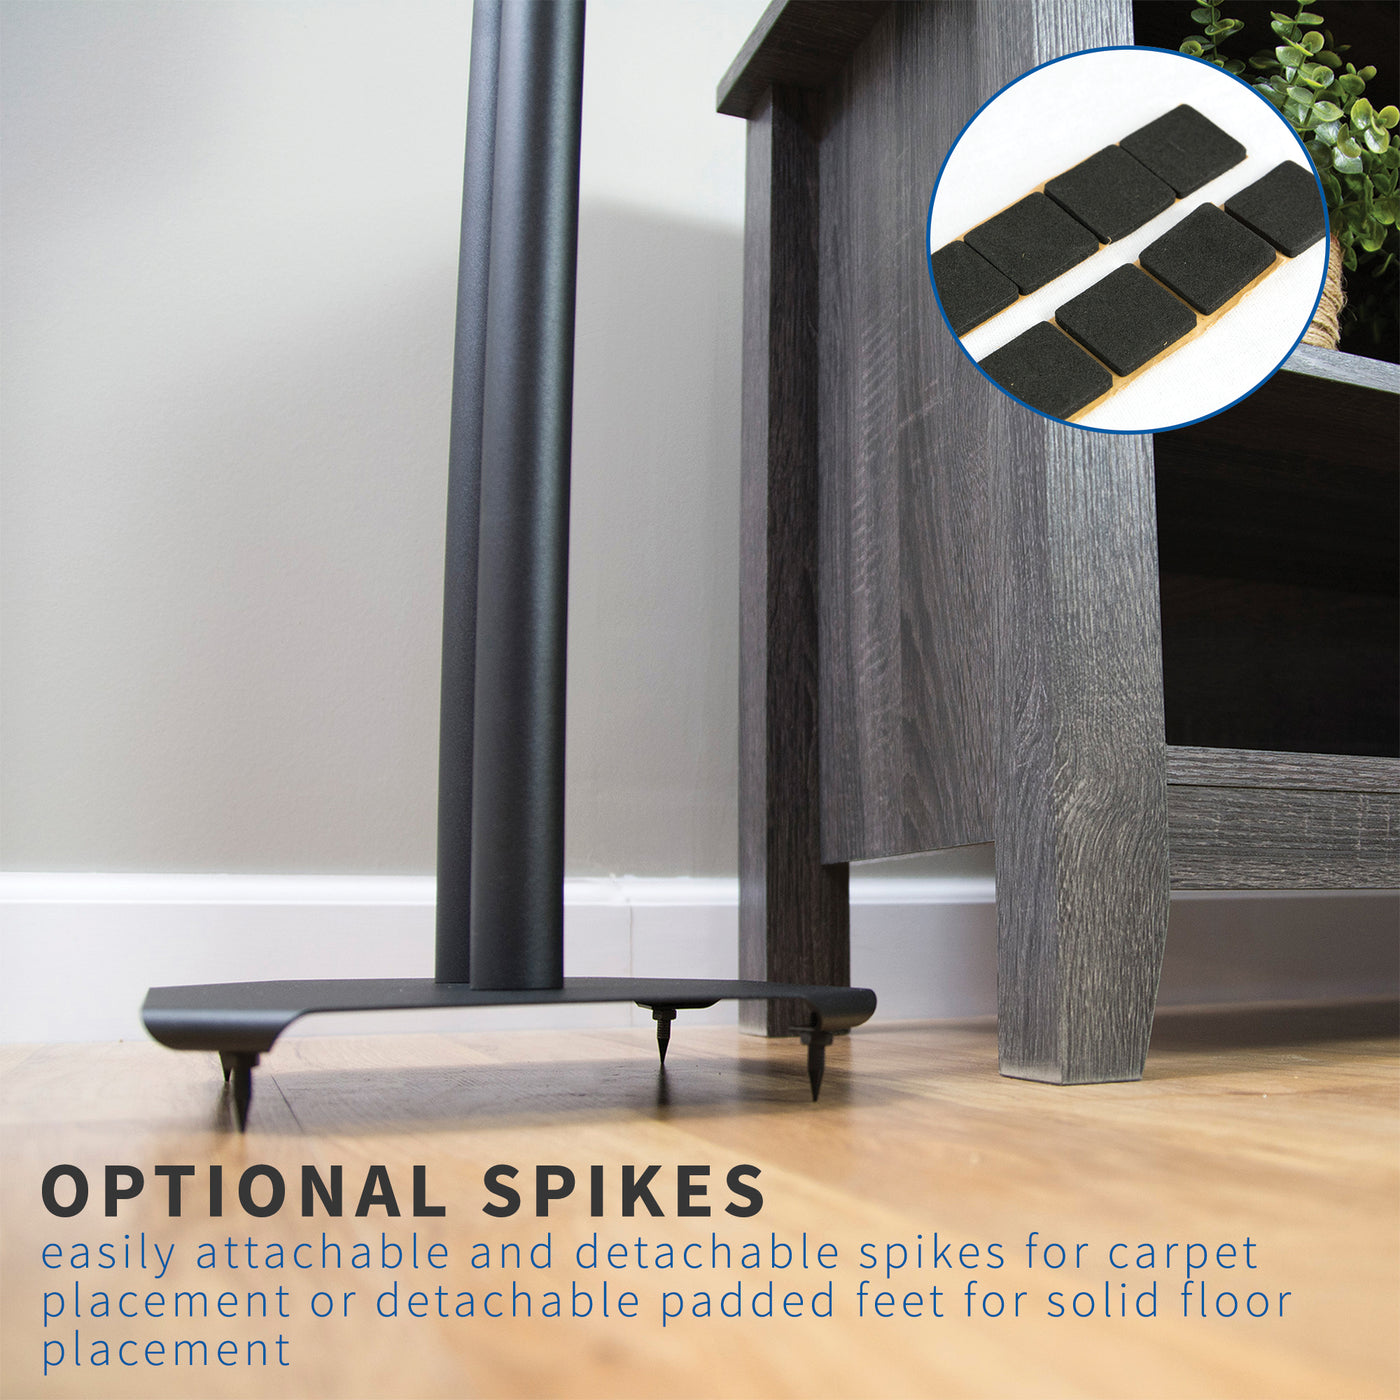 Optional carpet spikes or attachable padded feet to best suit the flooring of your room.